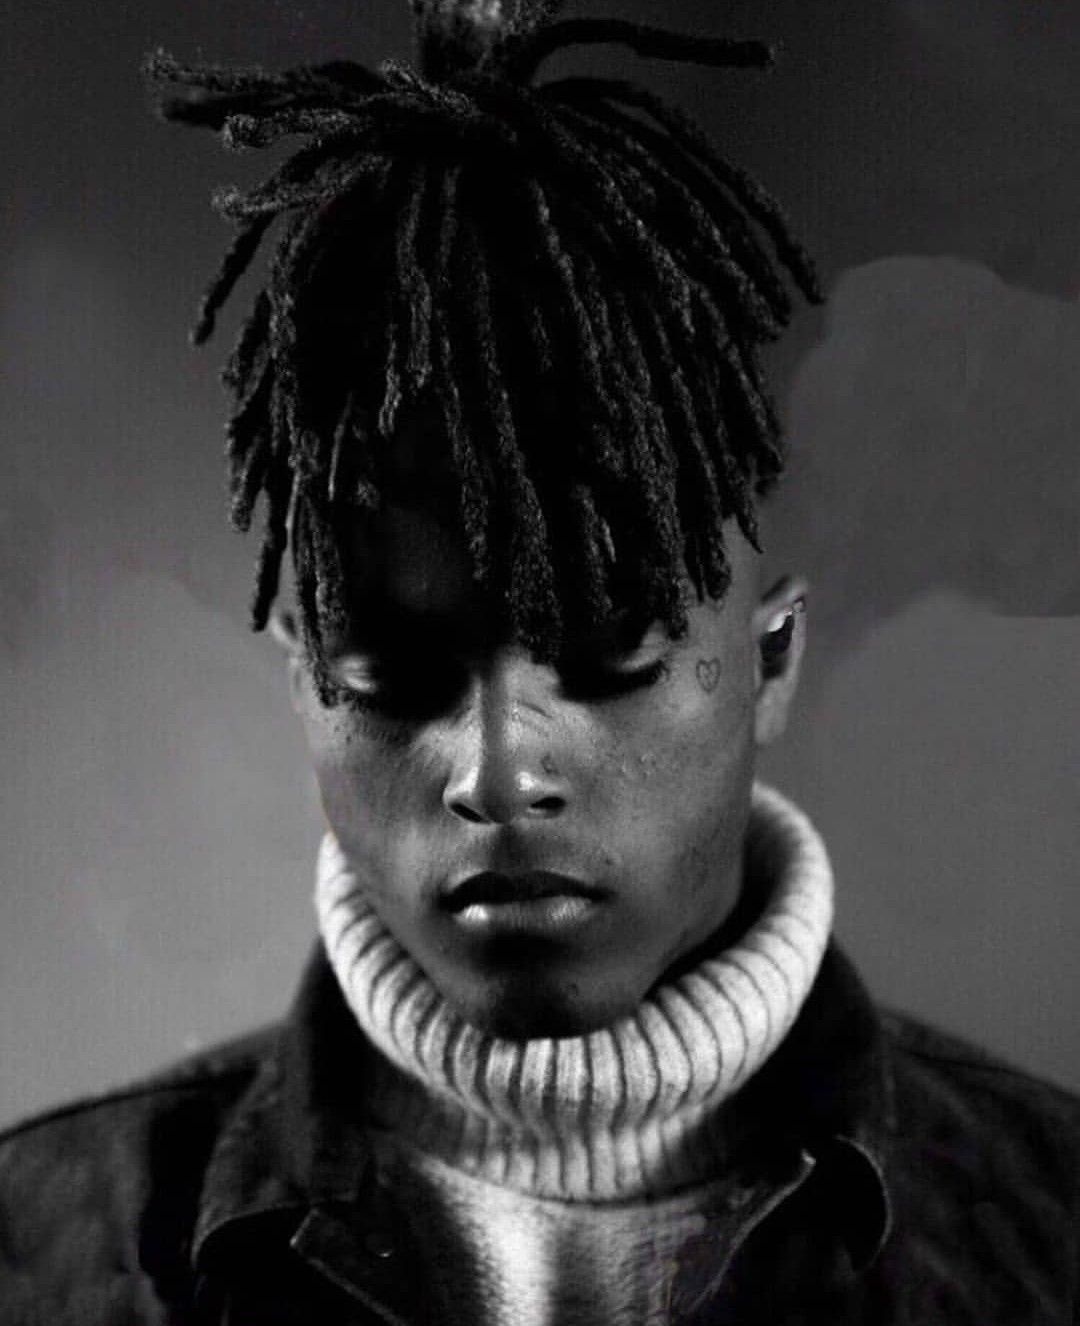 Xxxtentacion Black And White Wallpapers Wallpaper Cave 